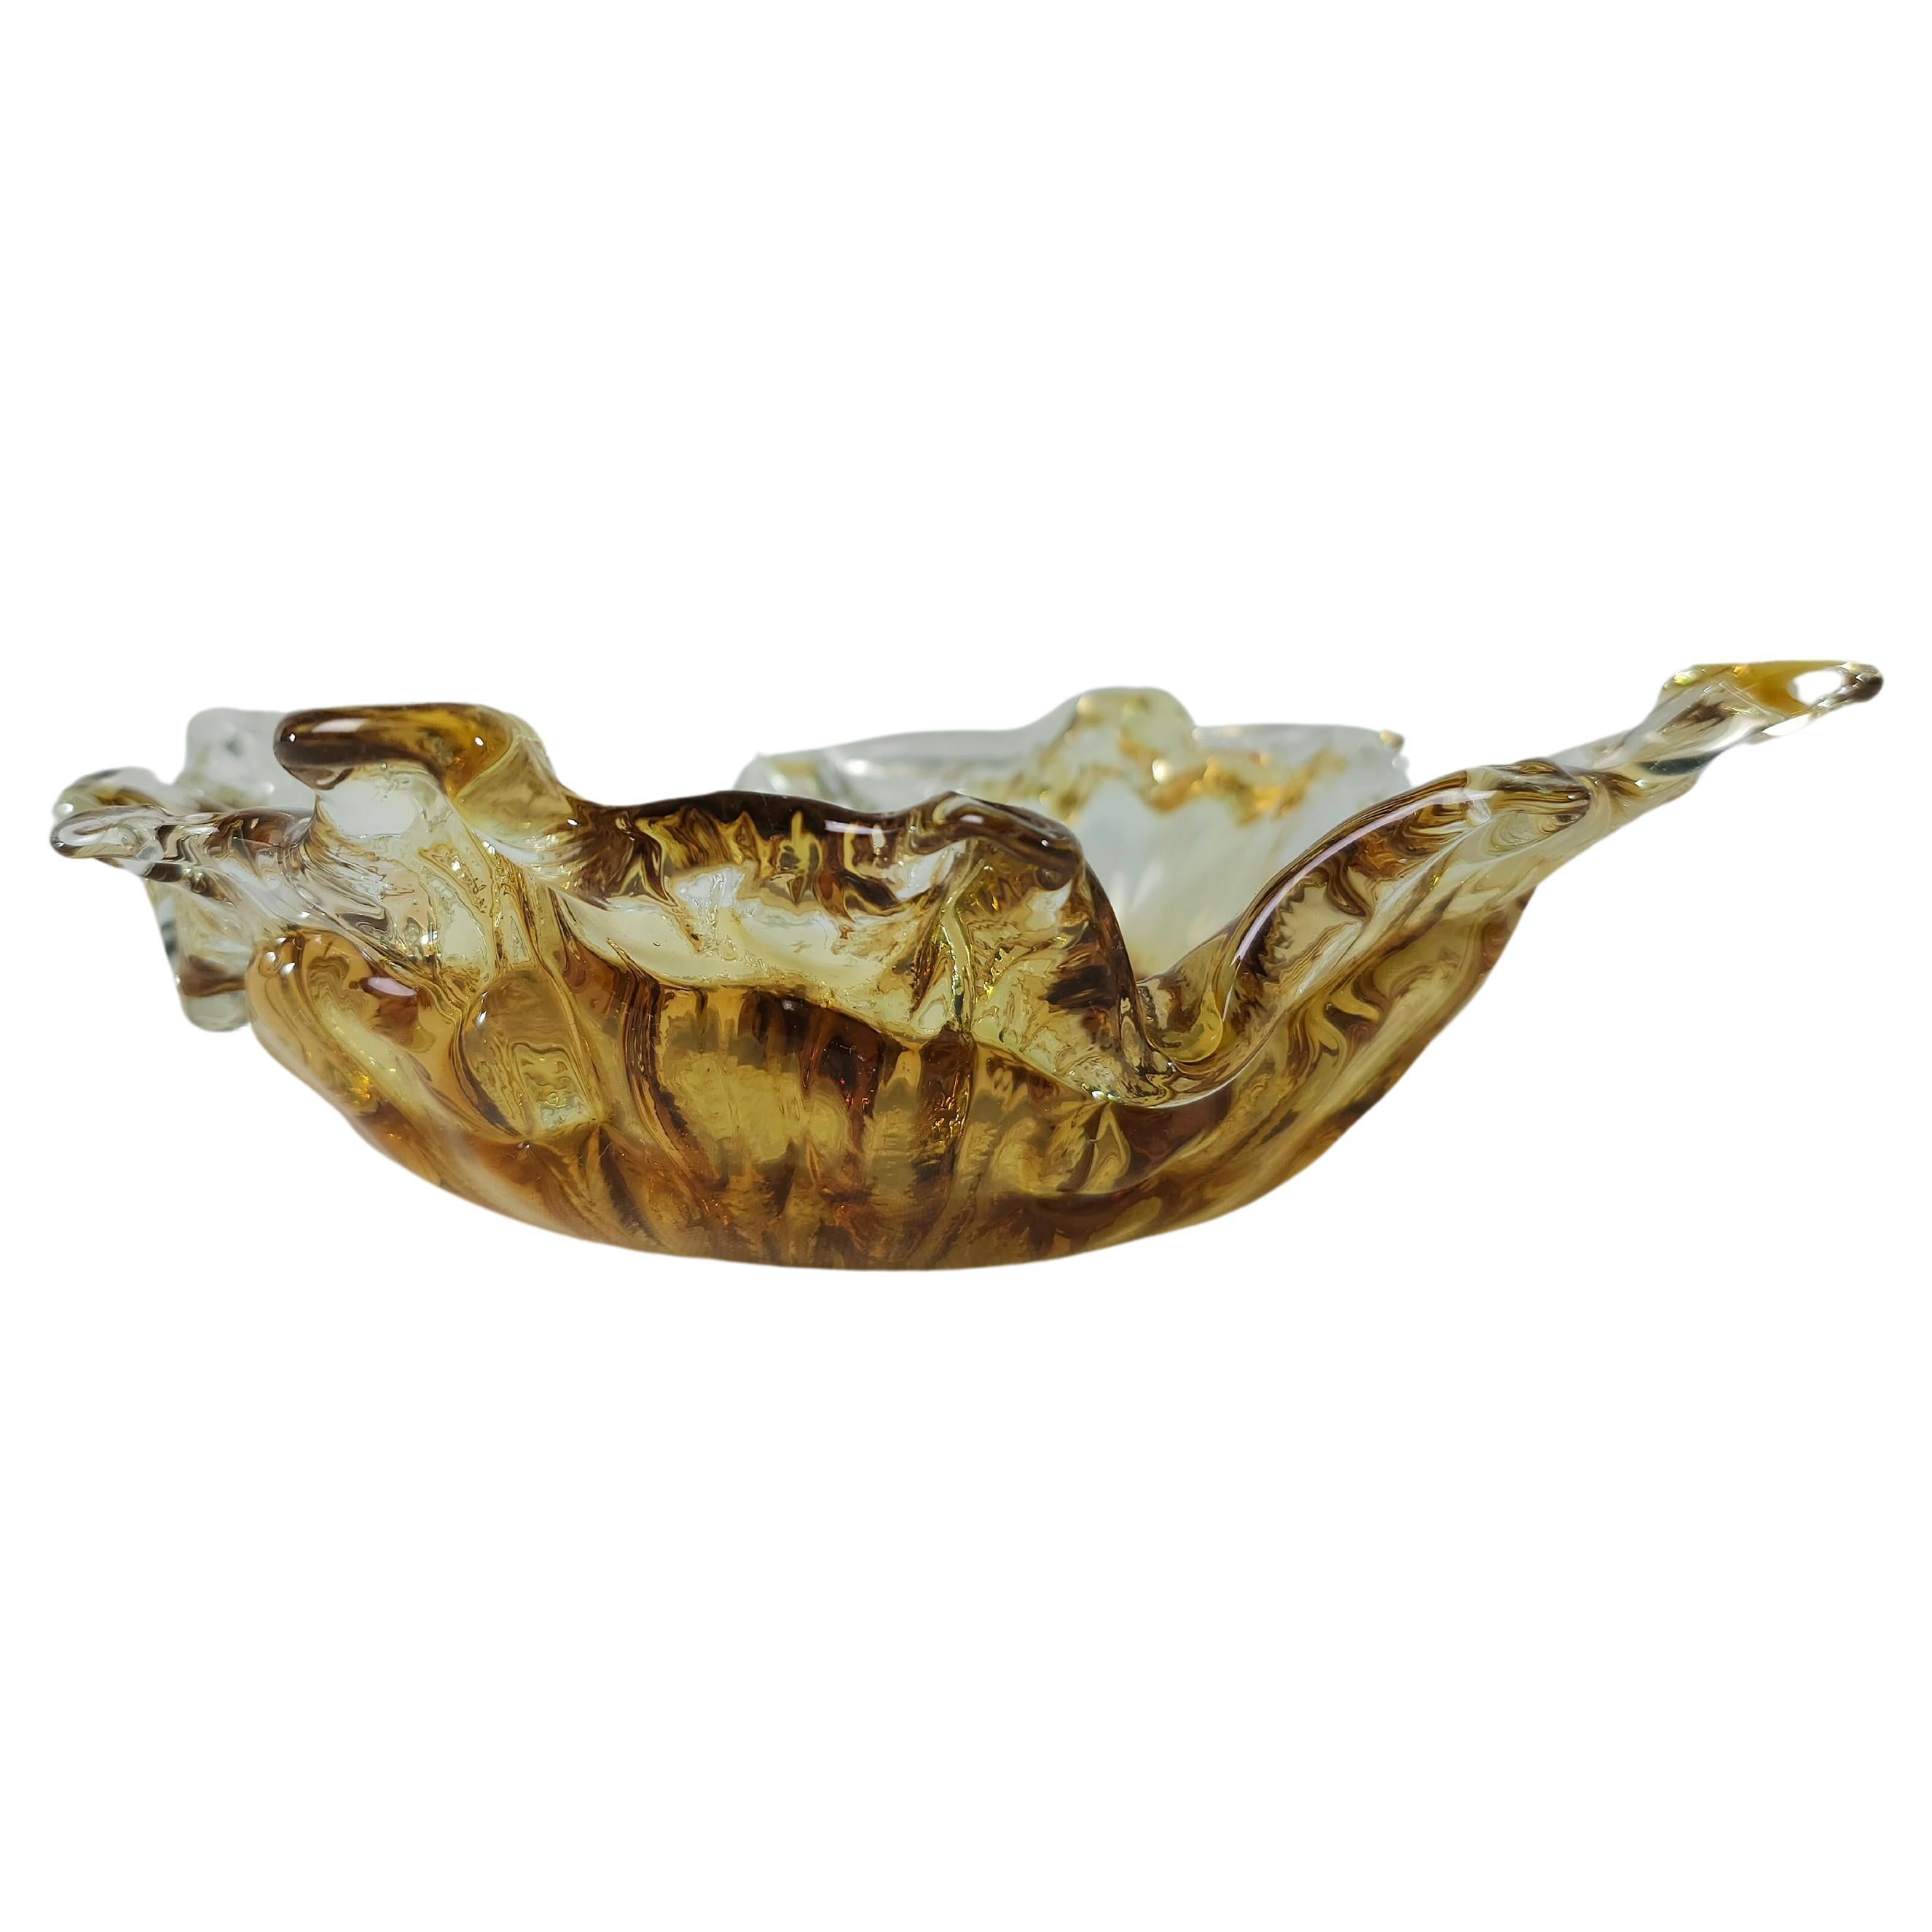 Bowl in faceted, two-tone, transparent and honeyed Murano glass. The vibrant color makes this items highly decorative. This original vintage glass element was designed and produced in the 1970s in, Italy.



Note: We try to offer our customers an